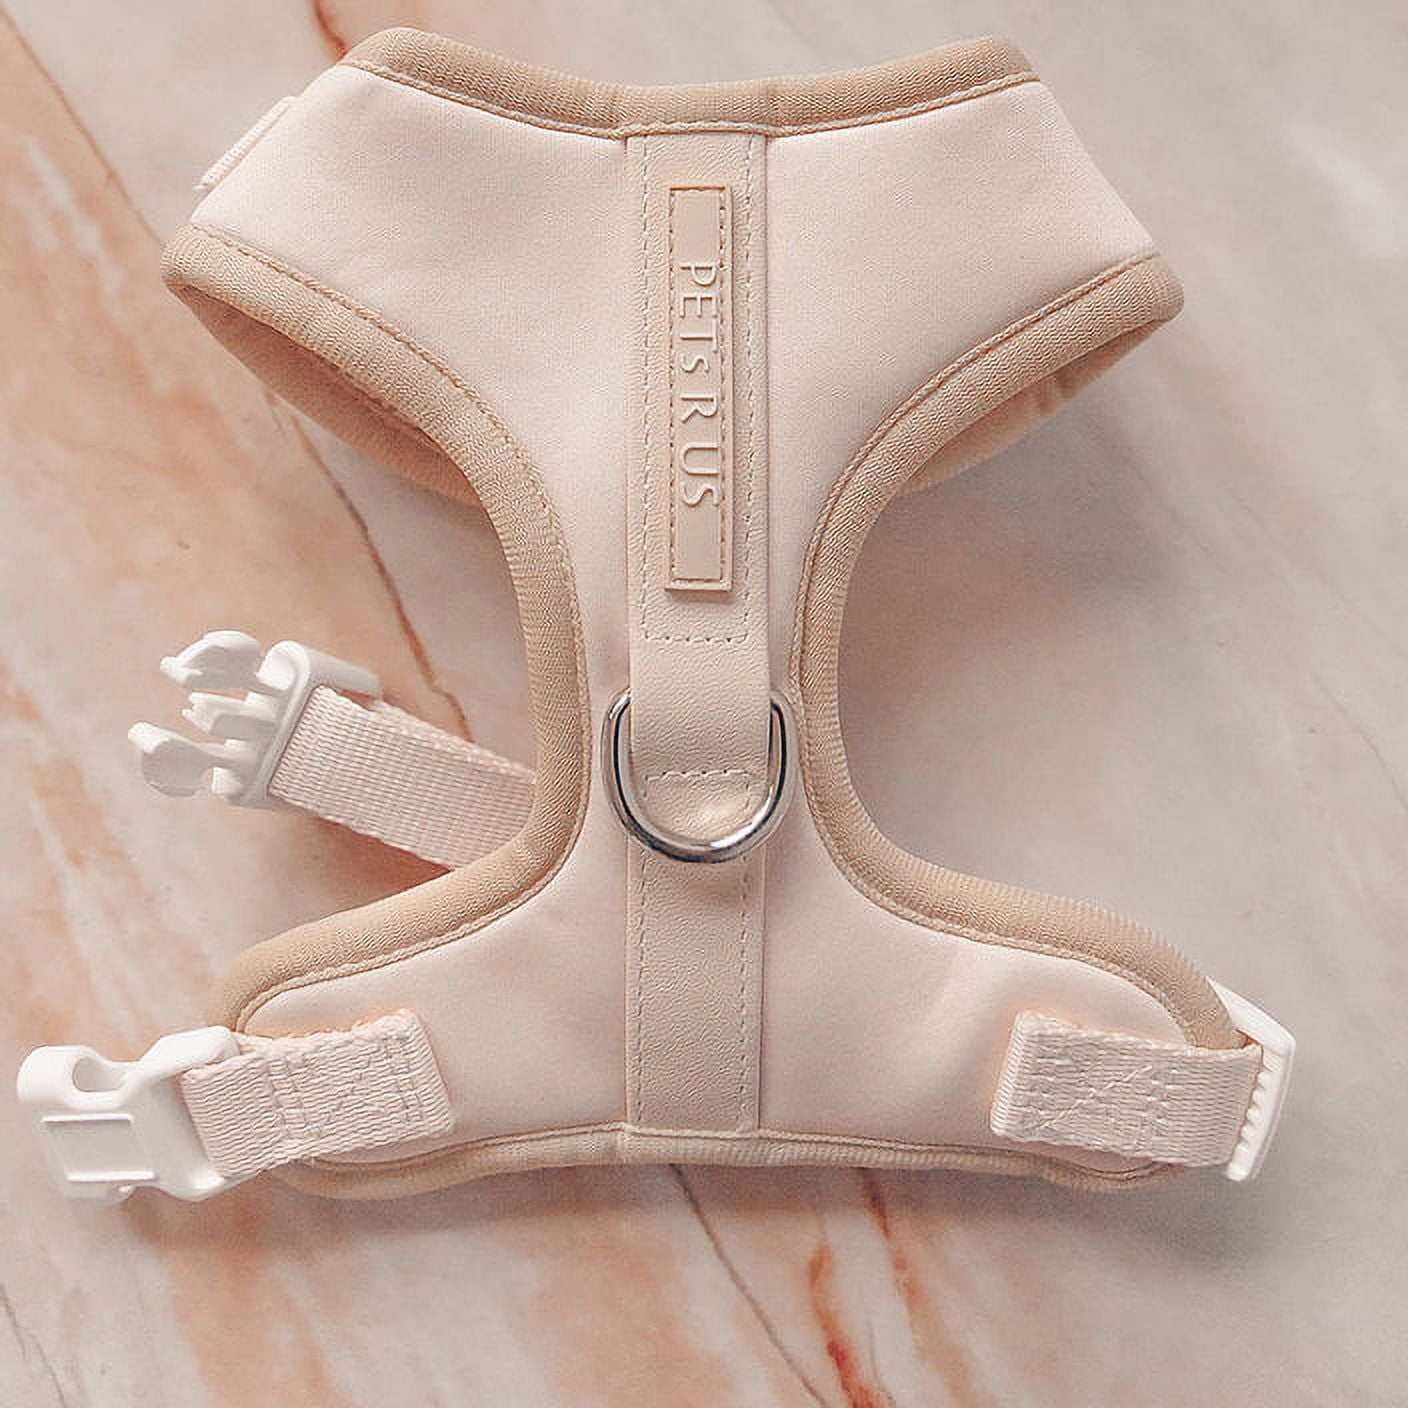 Beige Harness - Leather harness for your dog